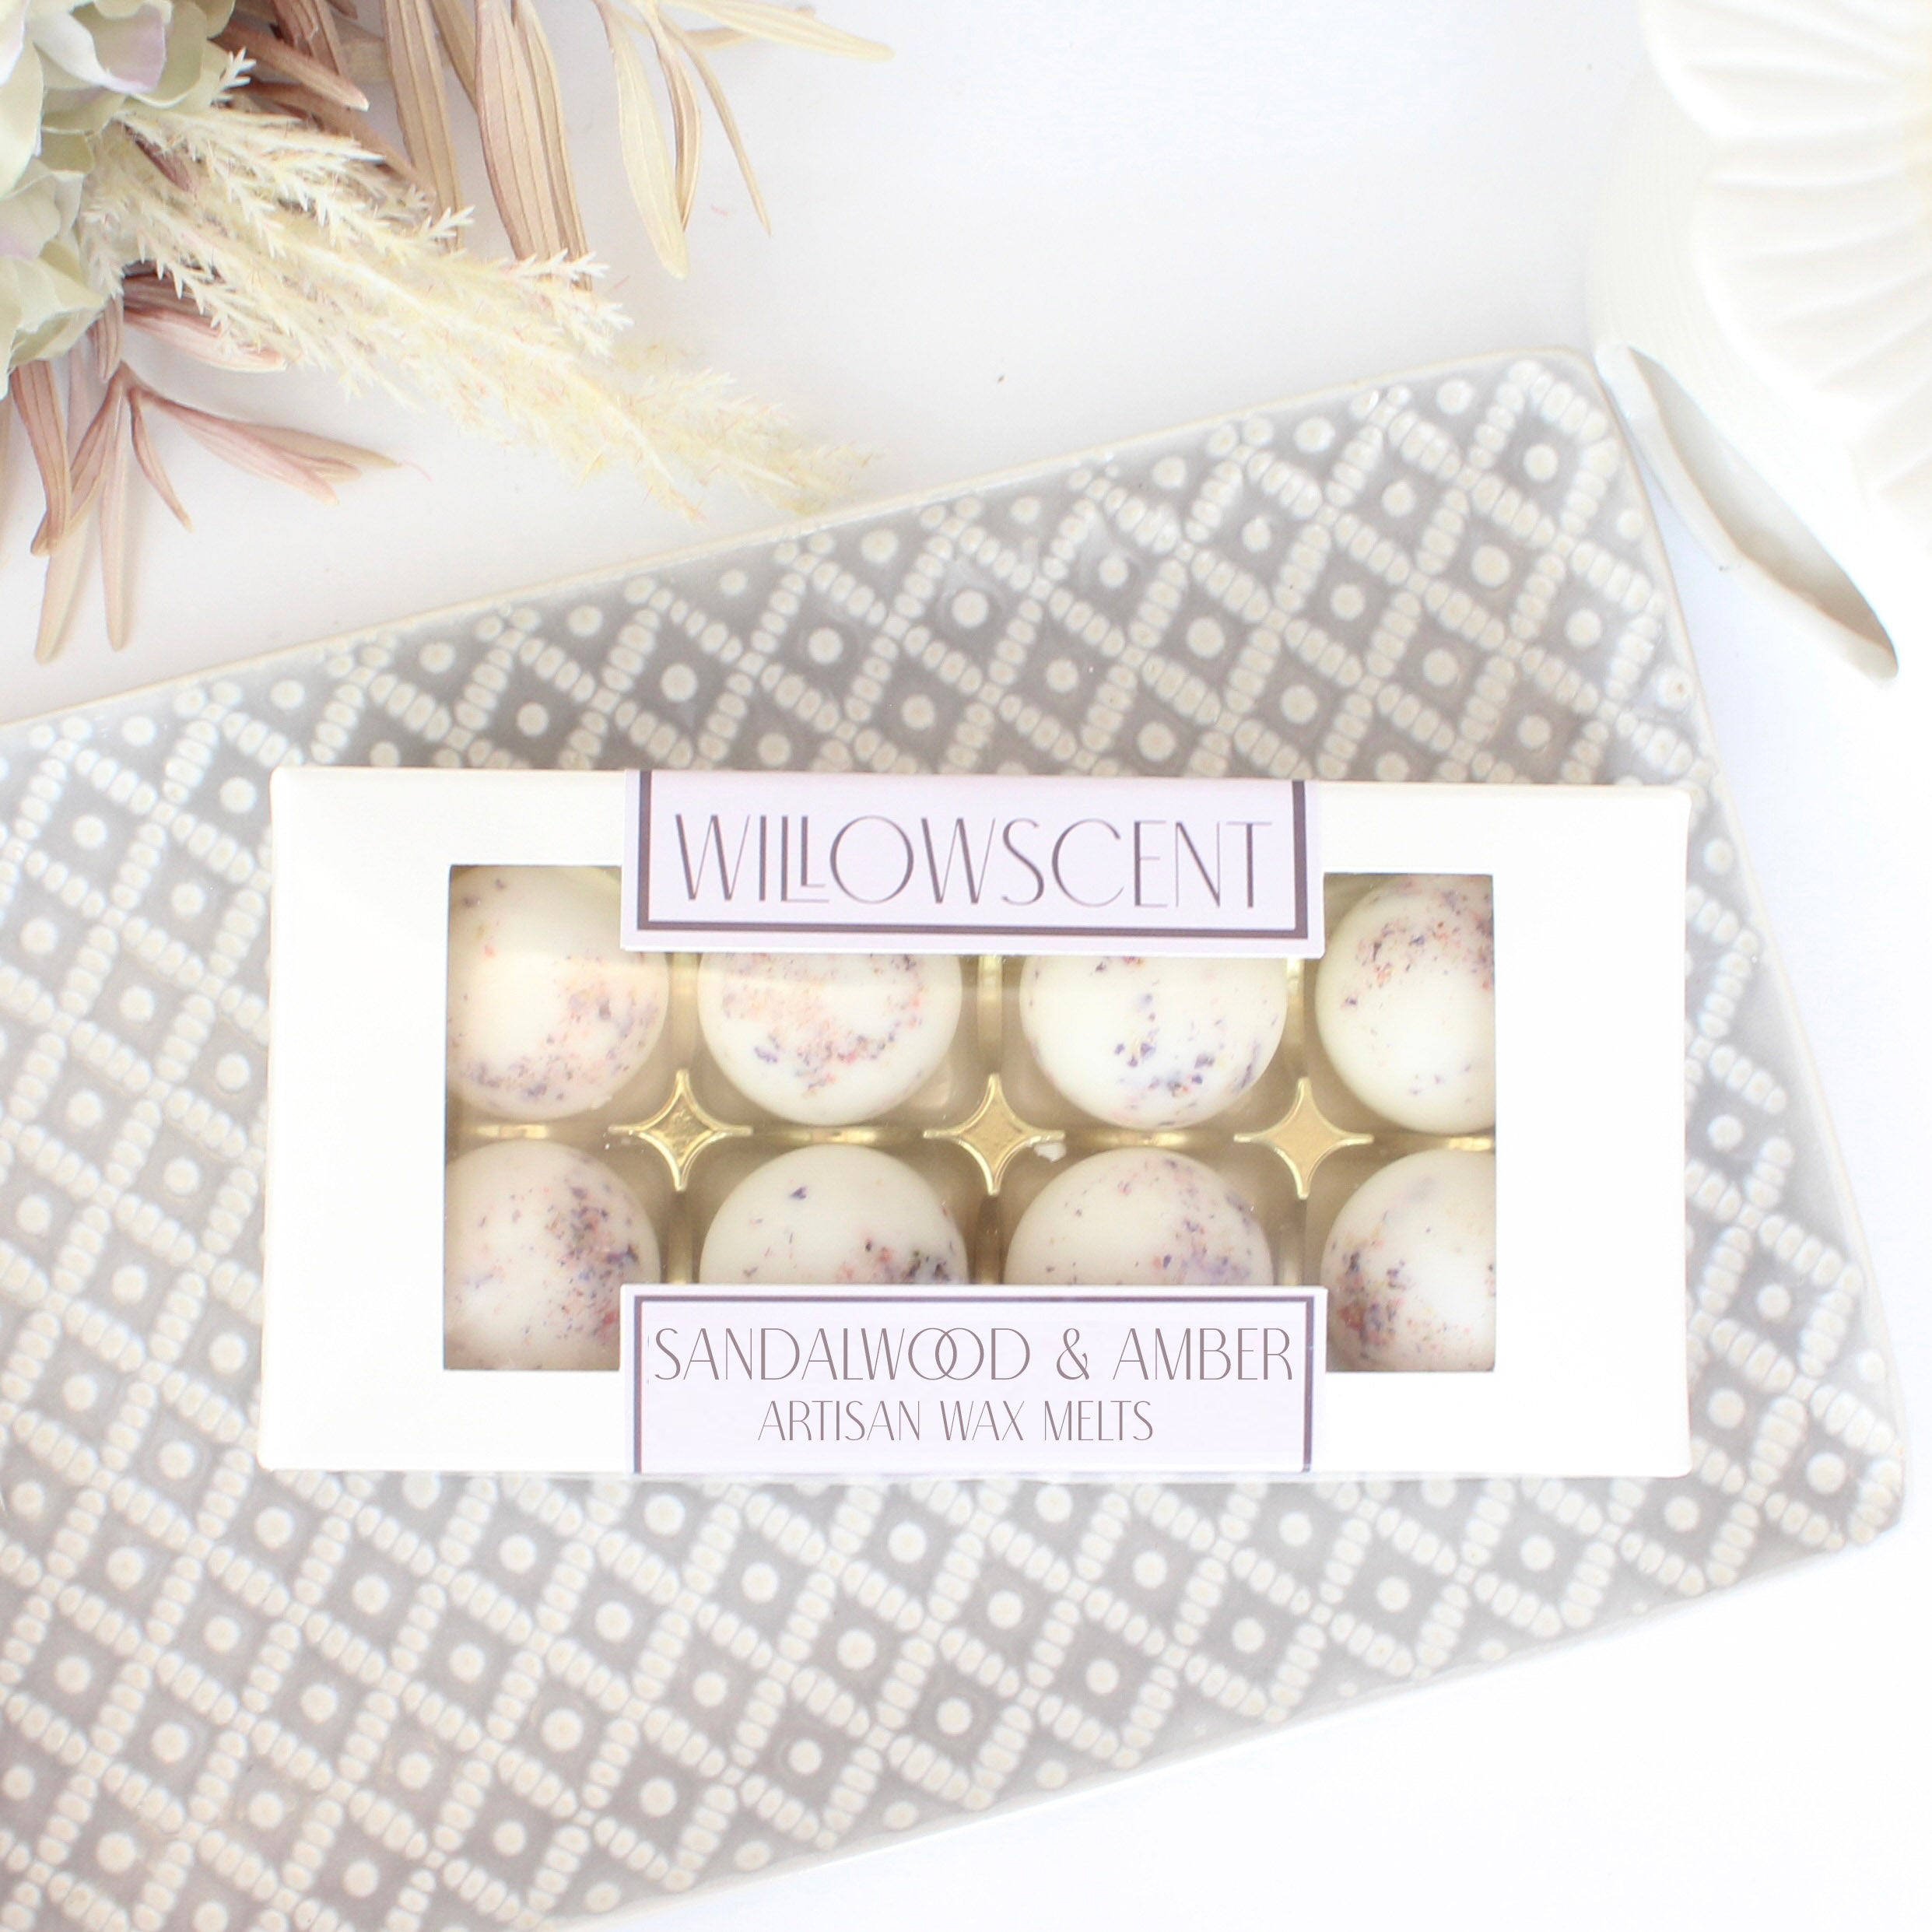 Sandalwood & Amber Scented Wax Melts